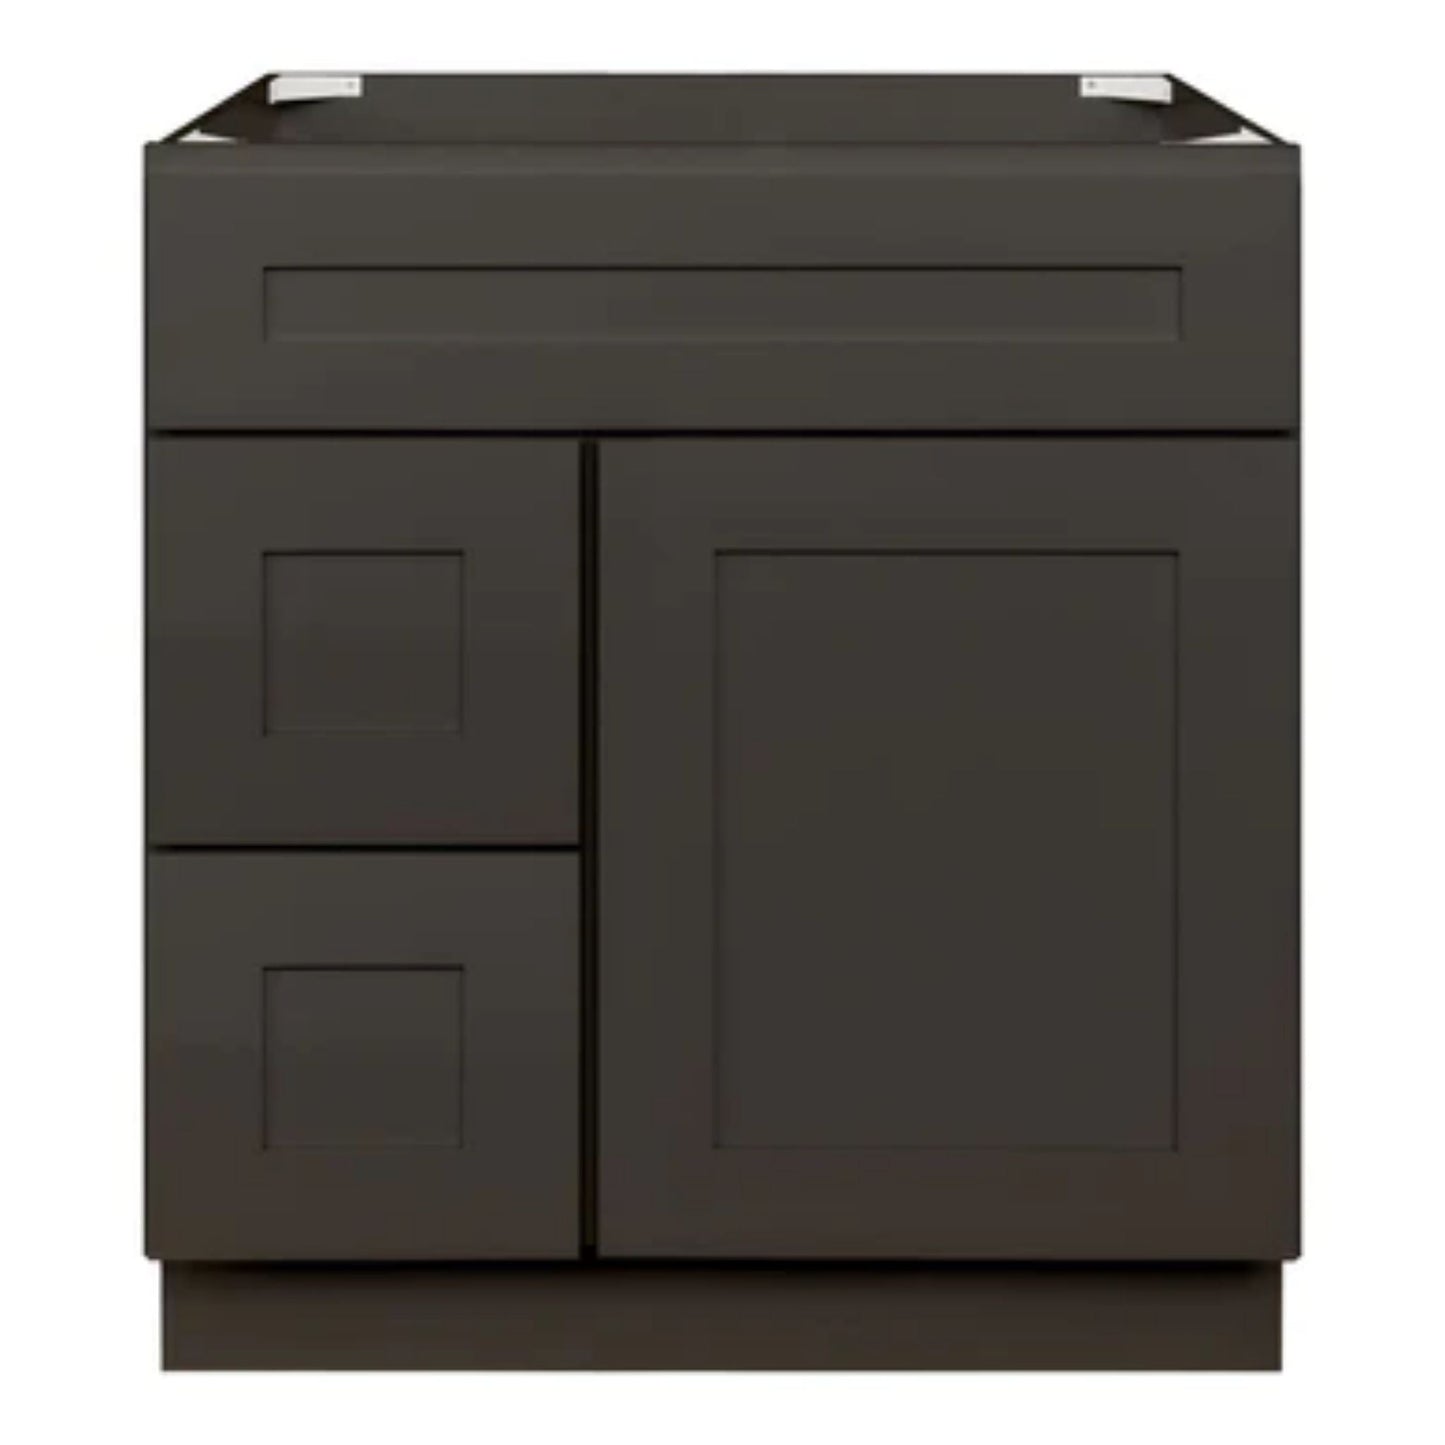 LessCare 30" x 21" x 34 1/2" Avalon Charcoal Vanity Sink Base Cabinet with Left Drawers